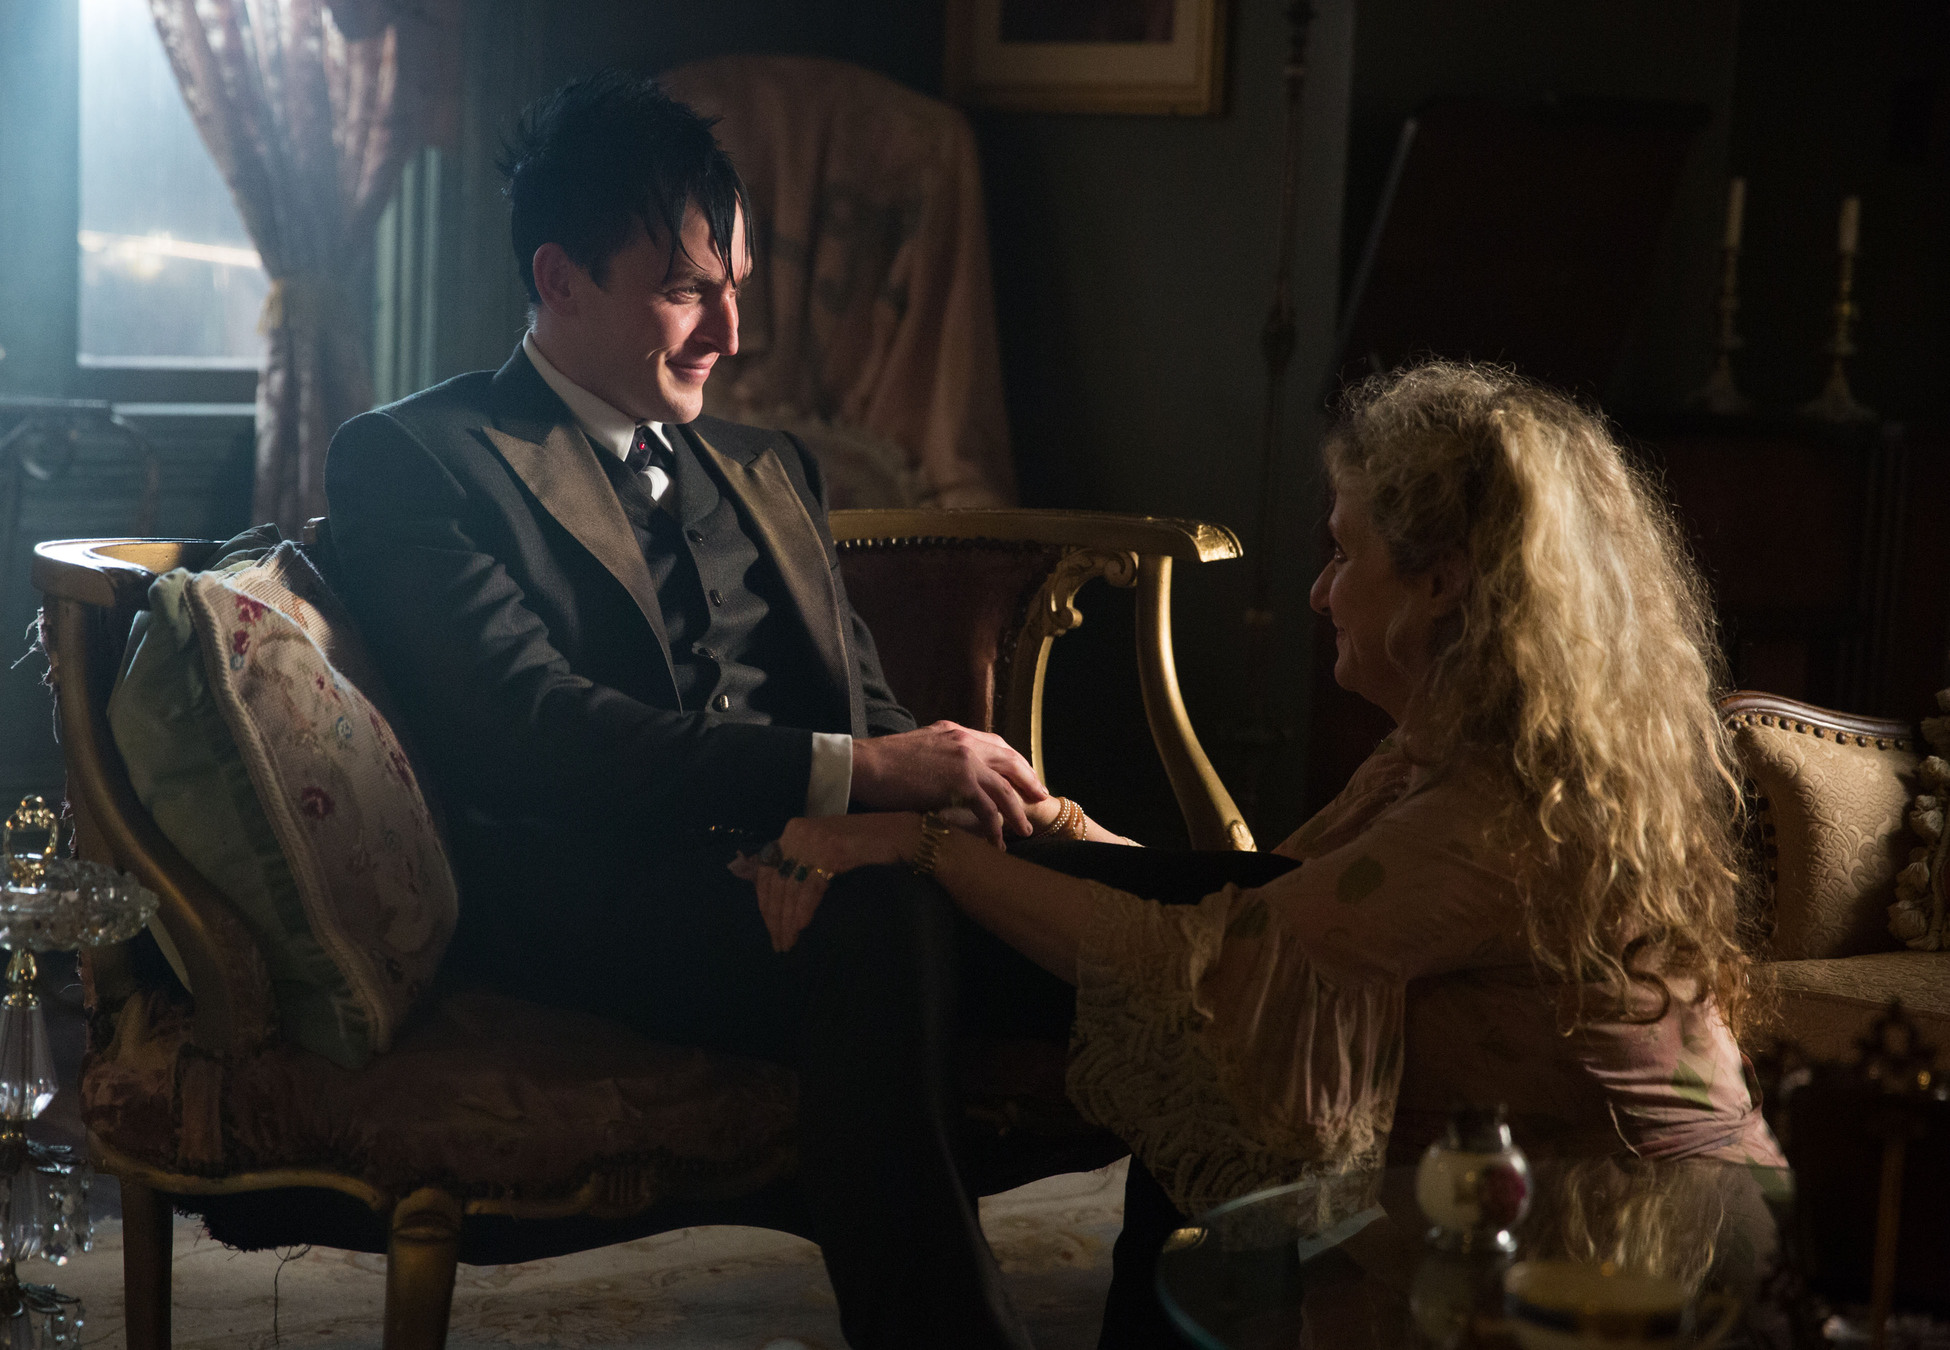 GOTHAM: Oswald Cobblepot (Robin Lord Taylor, L) returns home to his mother (guest star Carol Kane, R) in the "Spirit of The Goat" episode of GOTHAM airing Monday, Oct. 27 (8:00-9:00 PM ET/PT) on FOX. Â©2014 Fox Broadcasting Co. Cr: Jessica Miglio/FOX